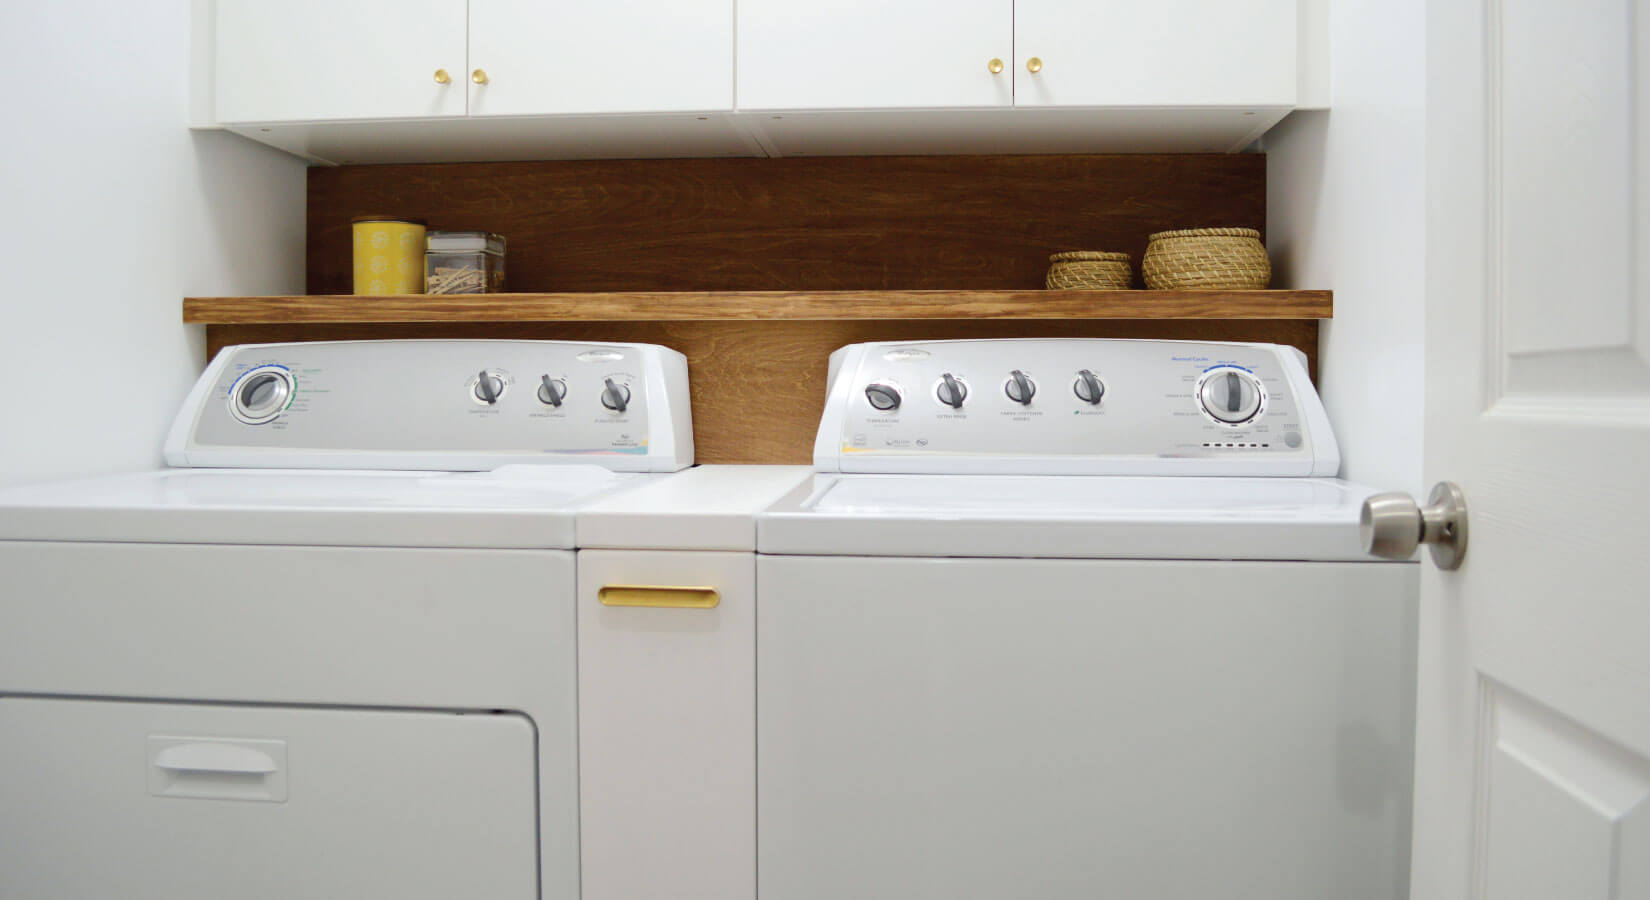 White washer and dryer with custom pull-out cabinet in between.